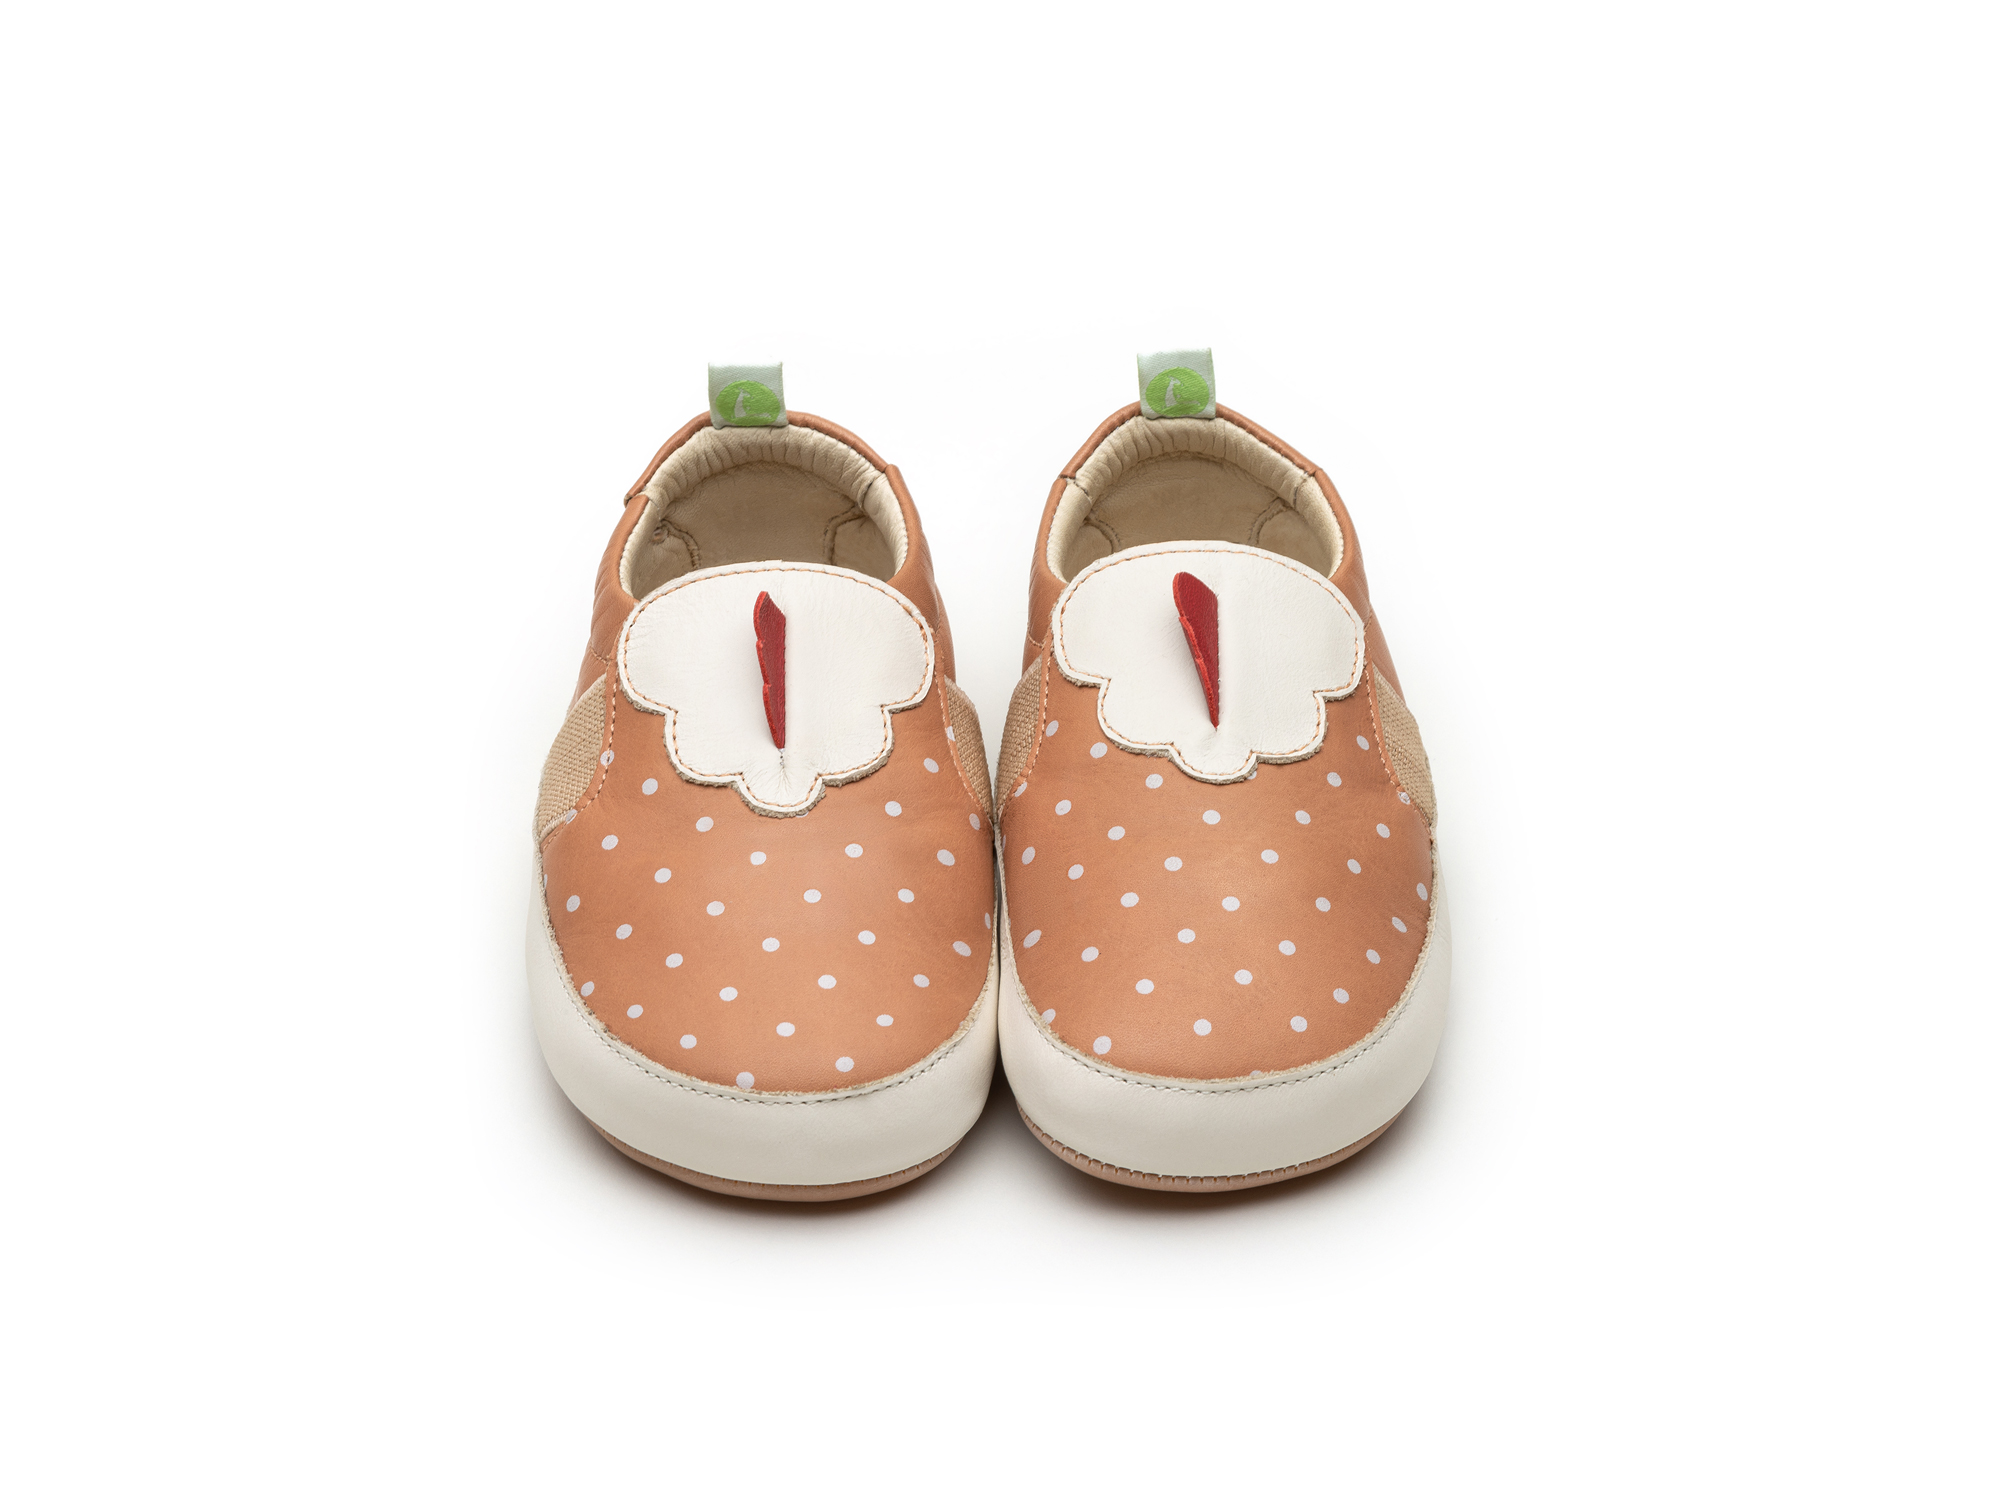 UP & GO Sneakers for Girls Fowly | Tip Toey Joey - Australia - 4